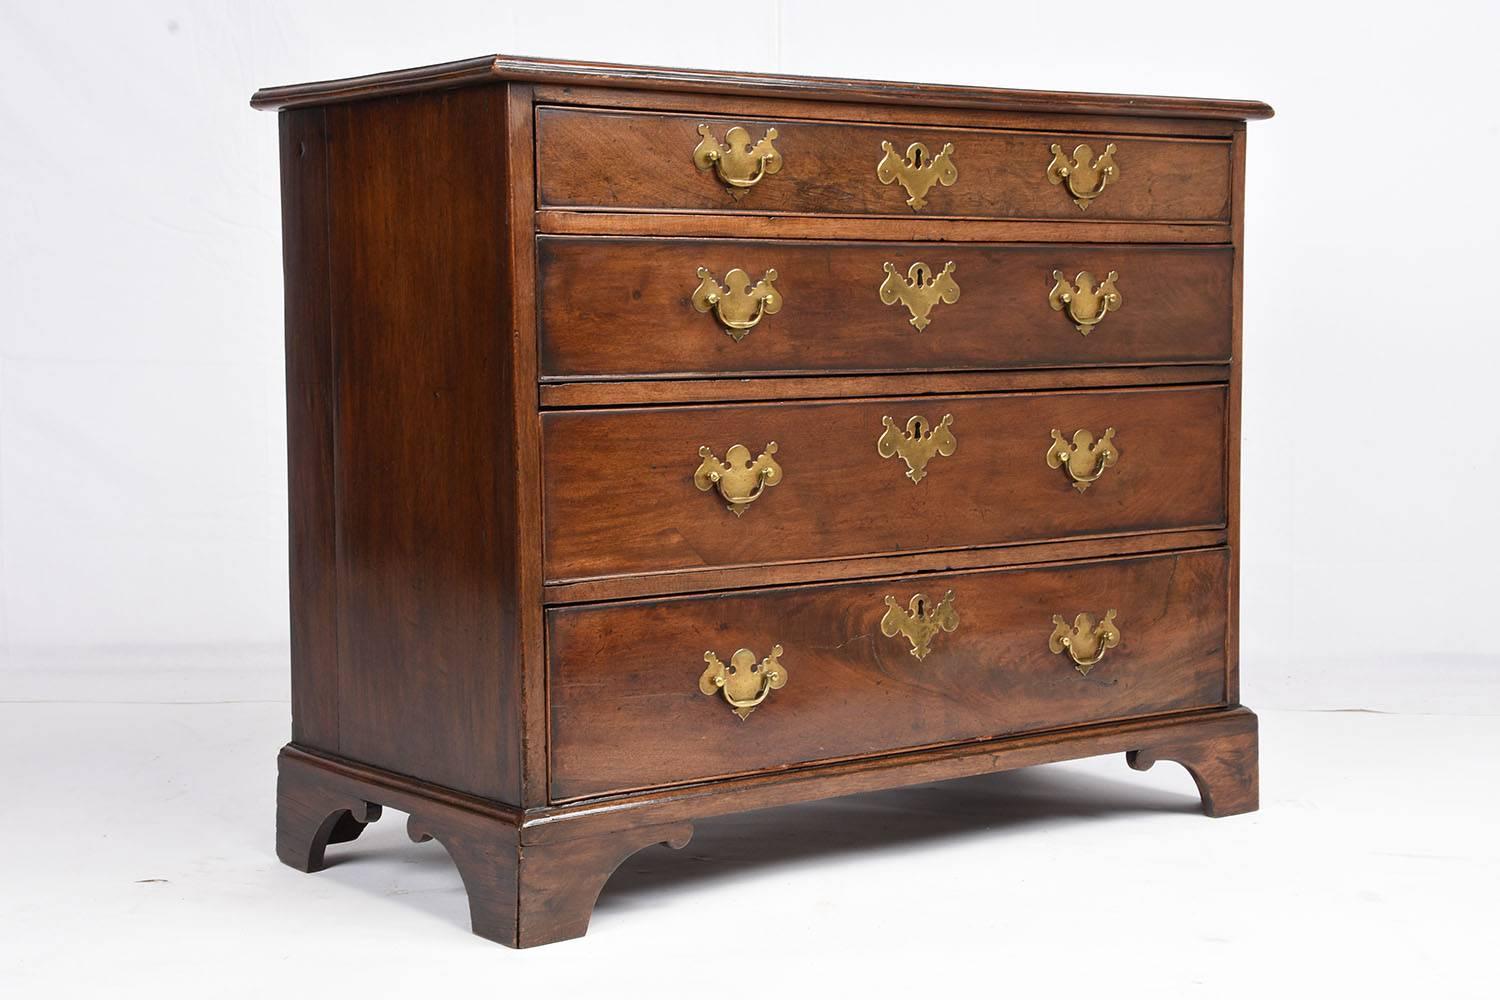 This 1850s antique George III-style chest of drawers is made of mahogany wood that features the original mid-tone color finish. The four drawers are different sizes and feature two decorative brass drawer pulls and a decorative keyhole plate. The